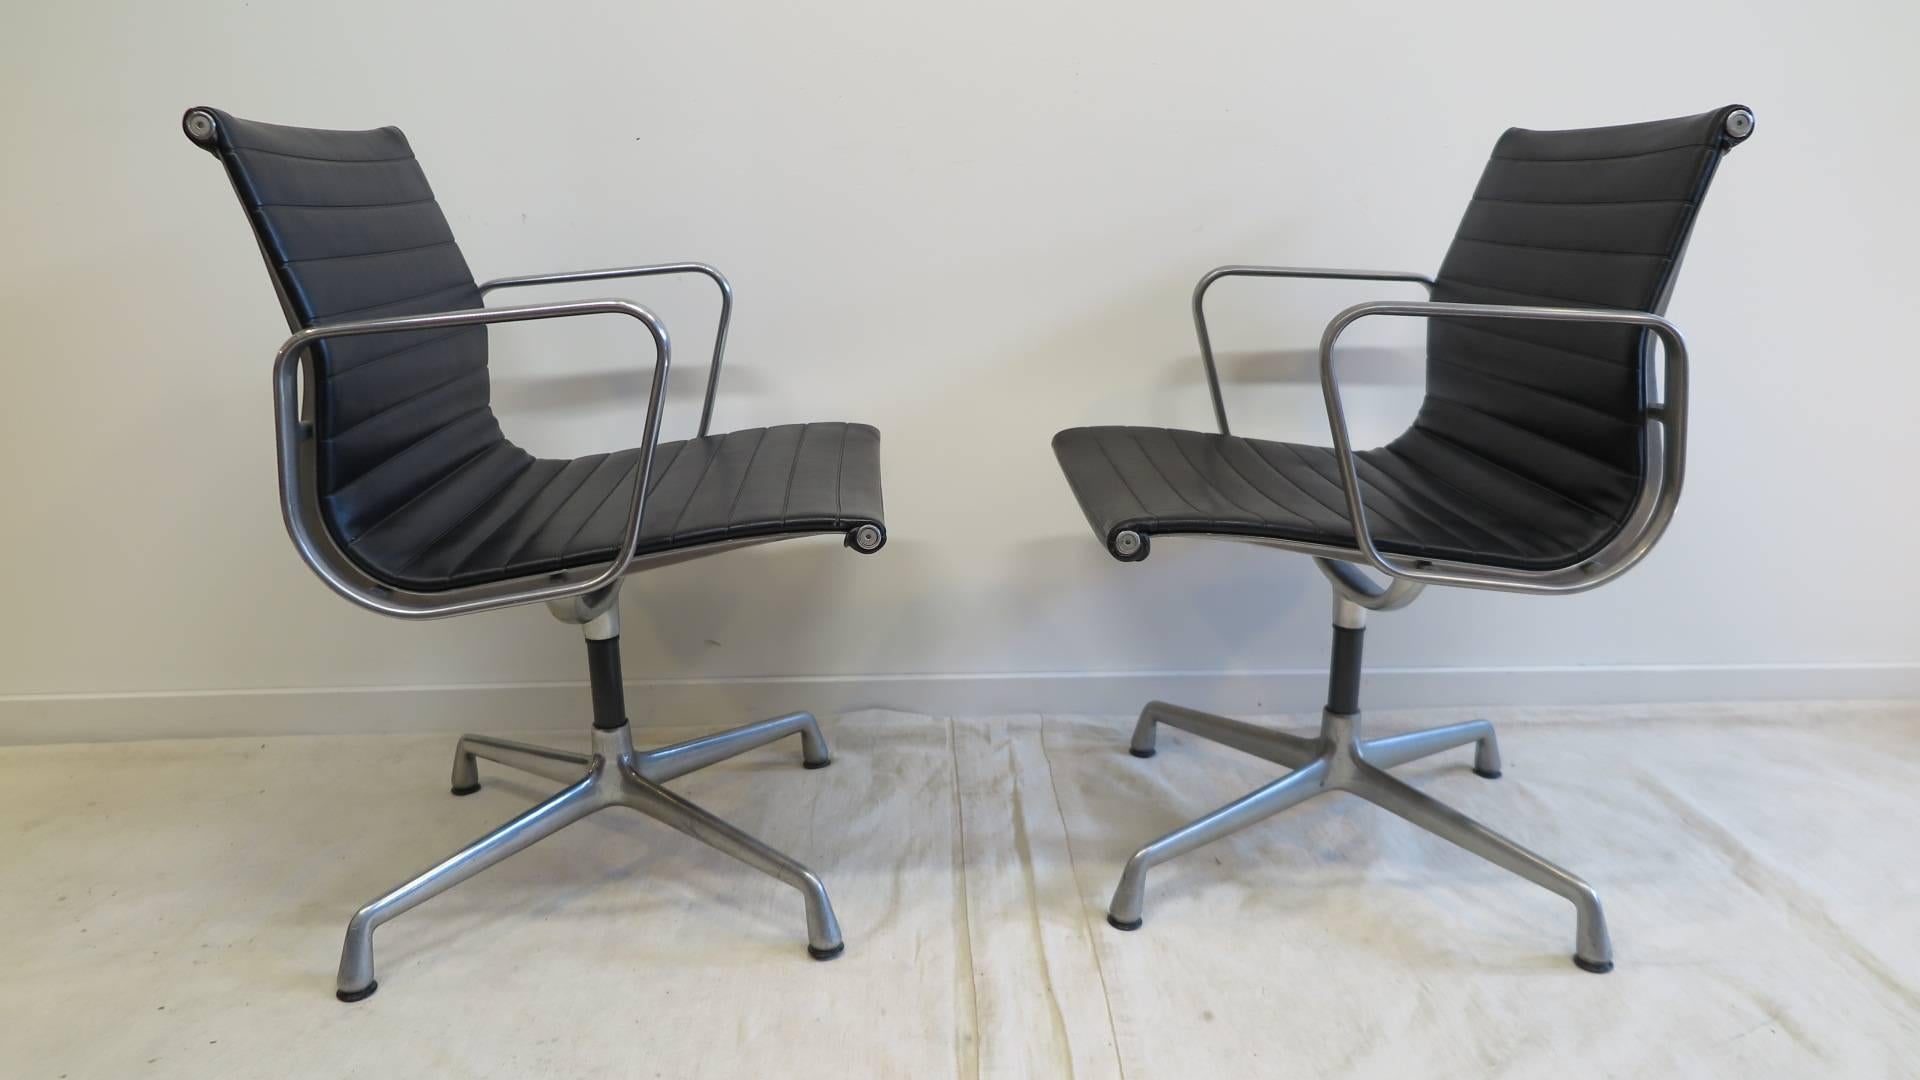 Herman Miller Aluminum Group management chairs in very good condition. Eames for Herman Miller Aluminium Group Management e chairs. Classics of Mid-Century Modern design. All original, black leather, very clean, 1970s
Pictured are two different